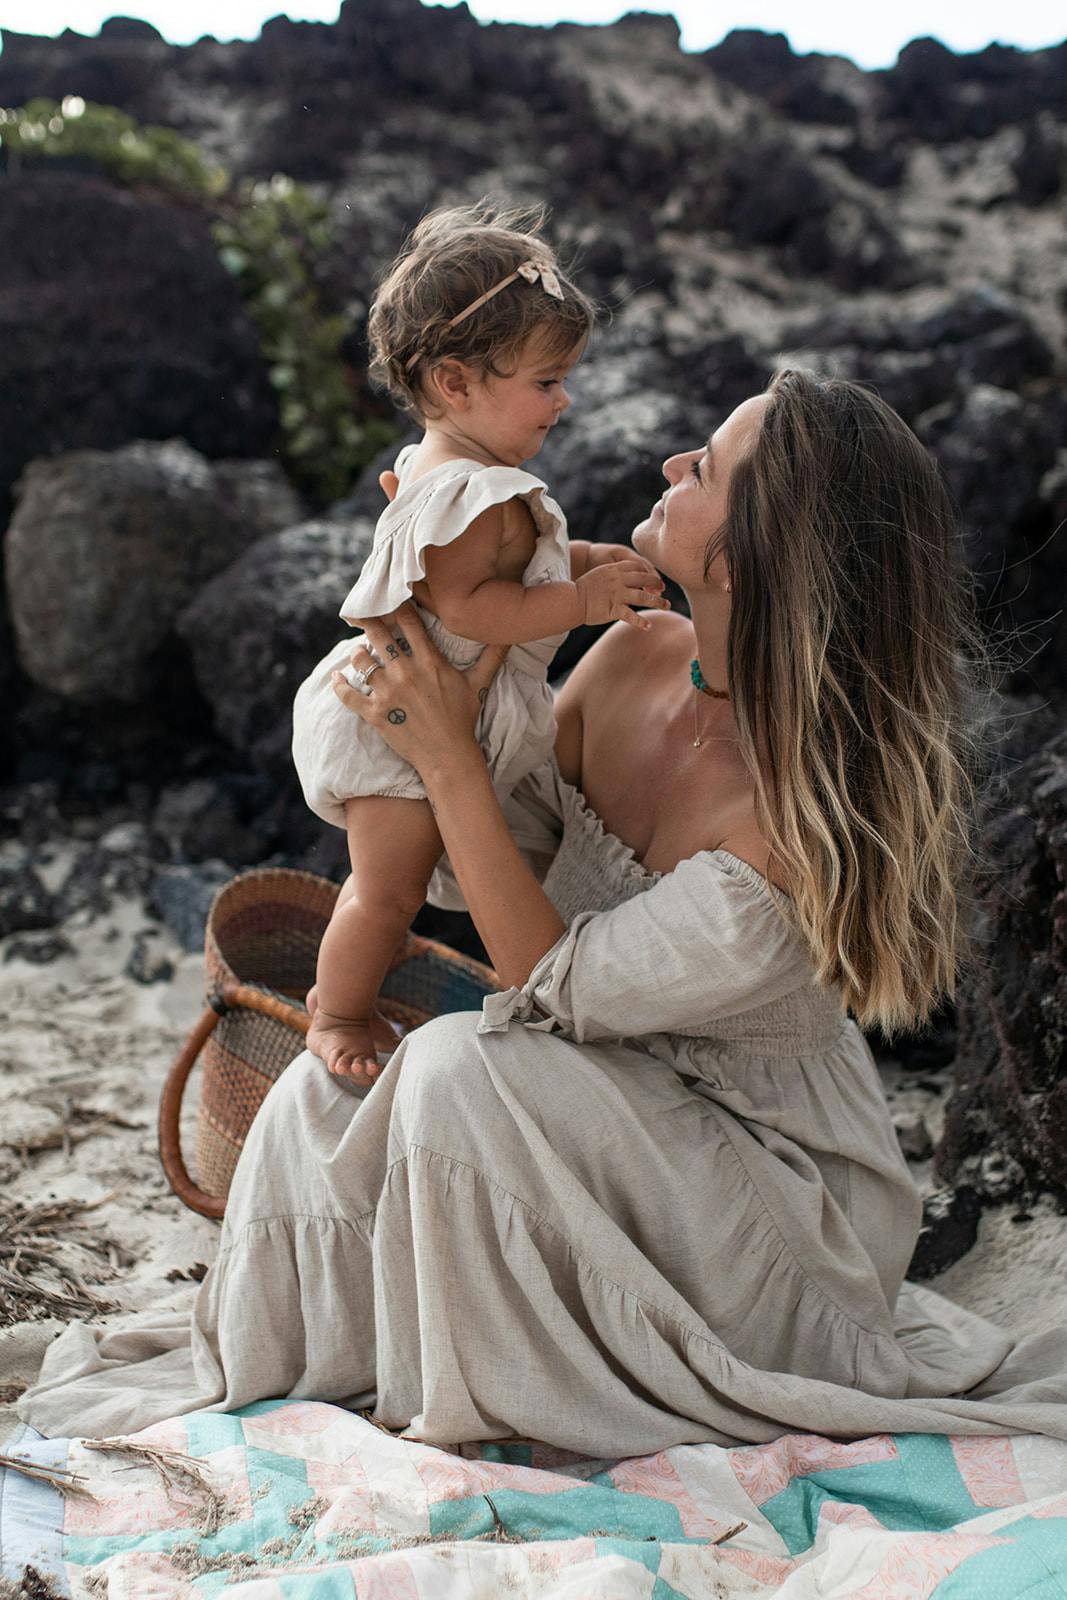 Intimate Hawaii family photography for private and personalized family sessions